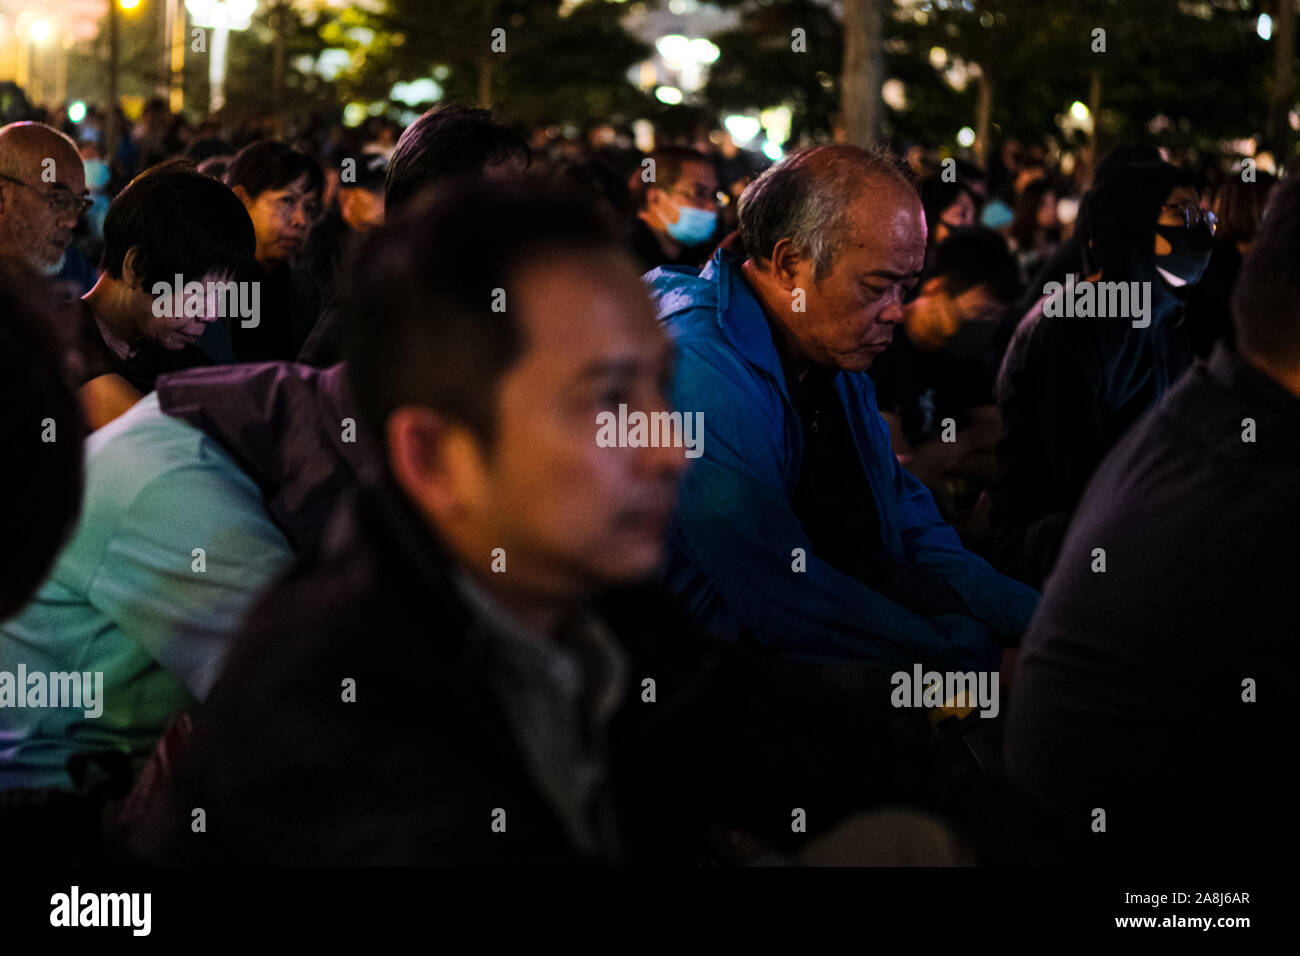 Hong Kong, China. 9th Nov, 2019. Tens of thousands of Hong Kongers participate during a memorial rally at Tamar Park in Hong Kong to mourn the death of a 22 years old university student Alex Chow Tsz Lok, who died from a serious brain injury during a fall on November 4th as police skirmished with demonstrators last weekend. He was left in critical condition and died after suffering a cardiac arrest on Friday. Credit: Keith Tsuji/ZUMA Wire/Alamy Live News Stock Photo